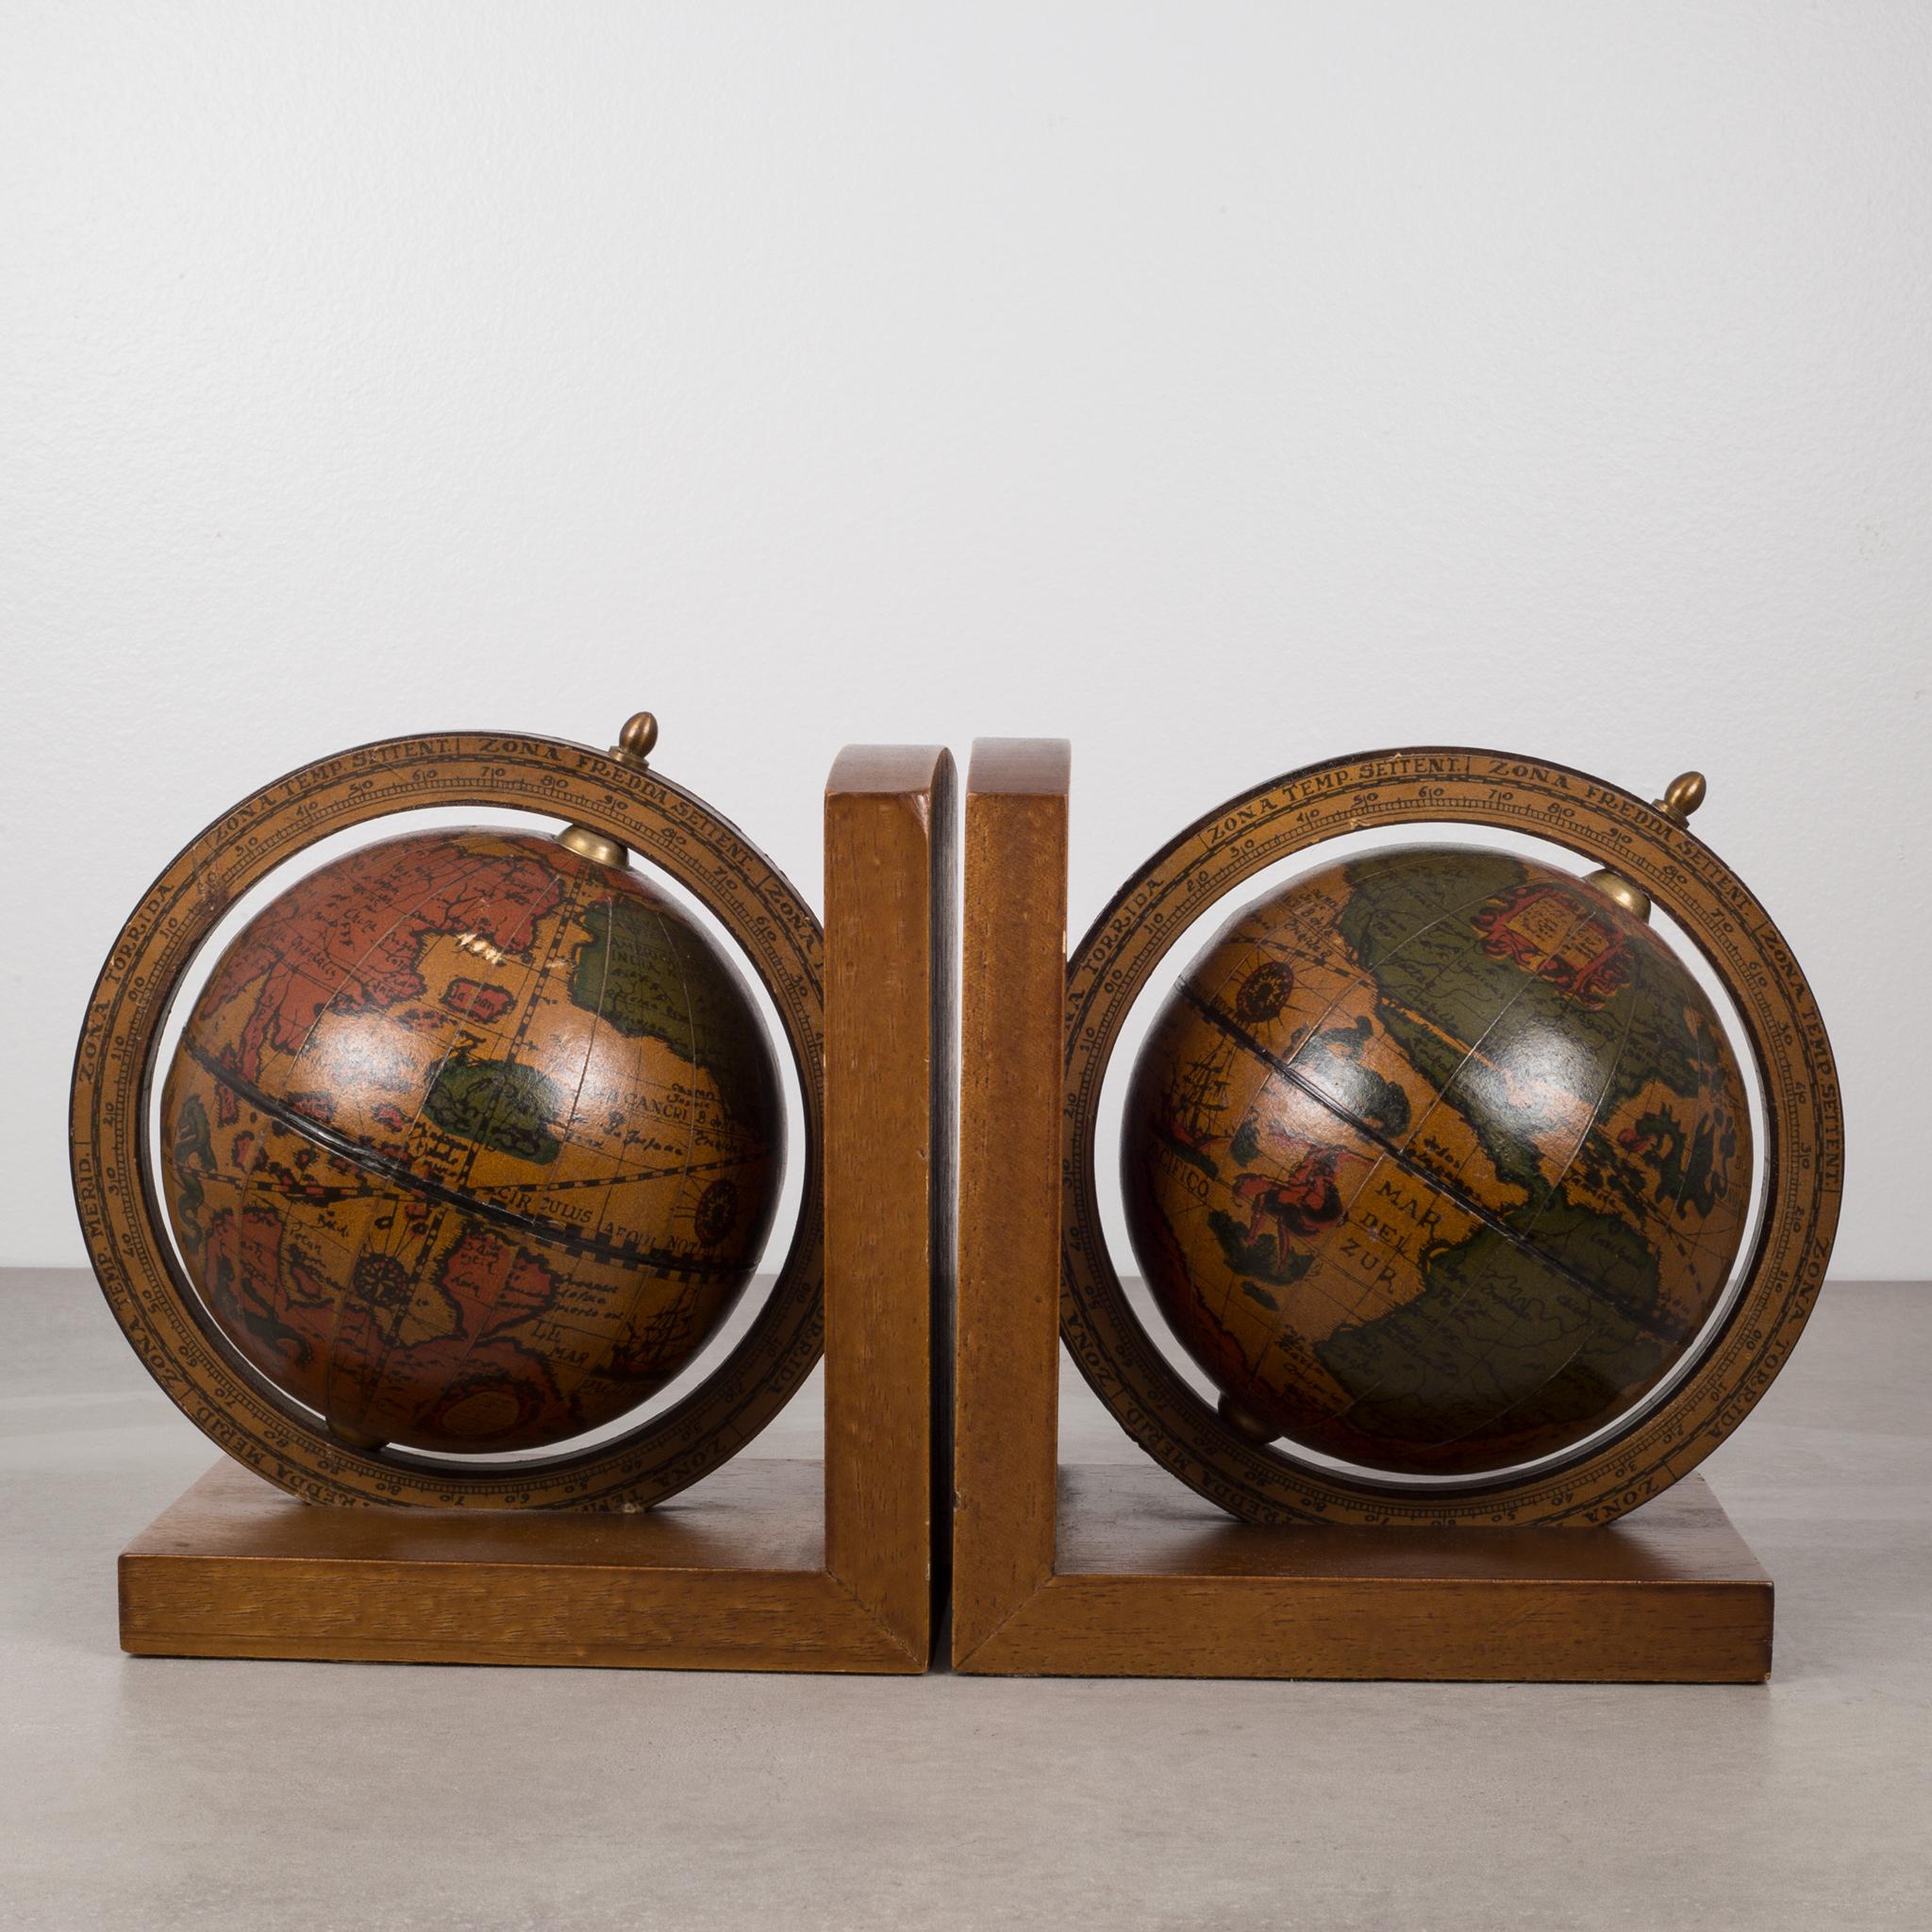 Rustic Pair of Rotating Globe Bookends with Brass Tips, circa 1950s-1970s